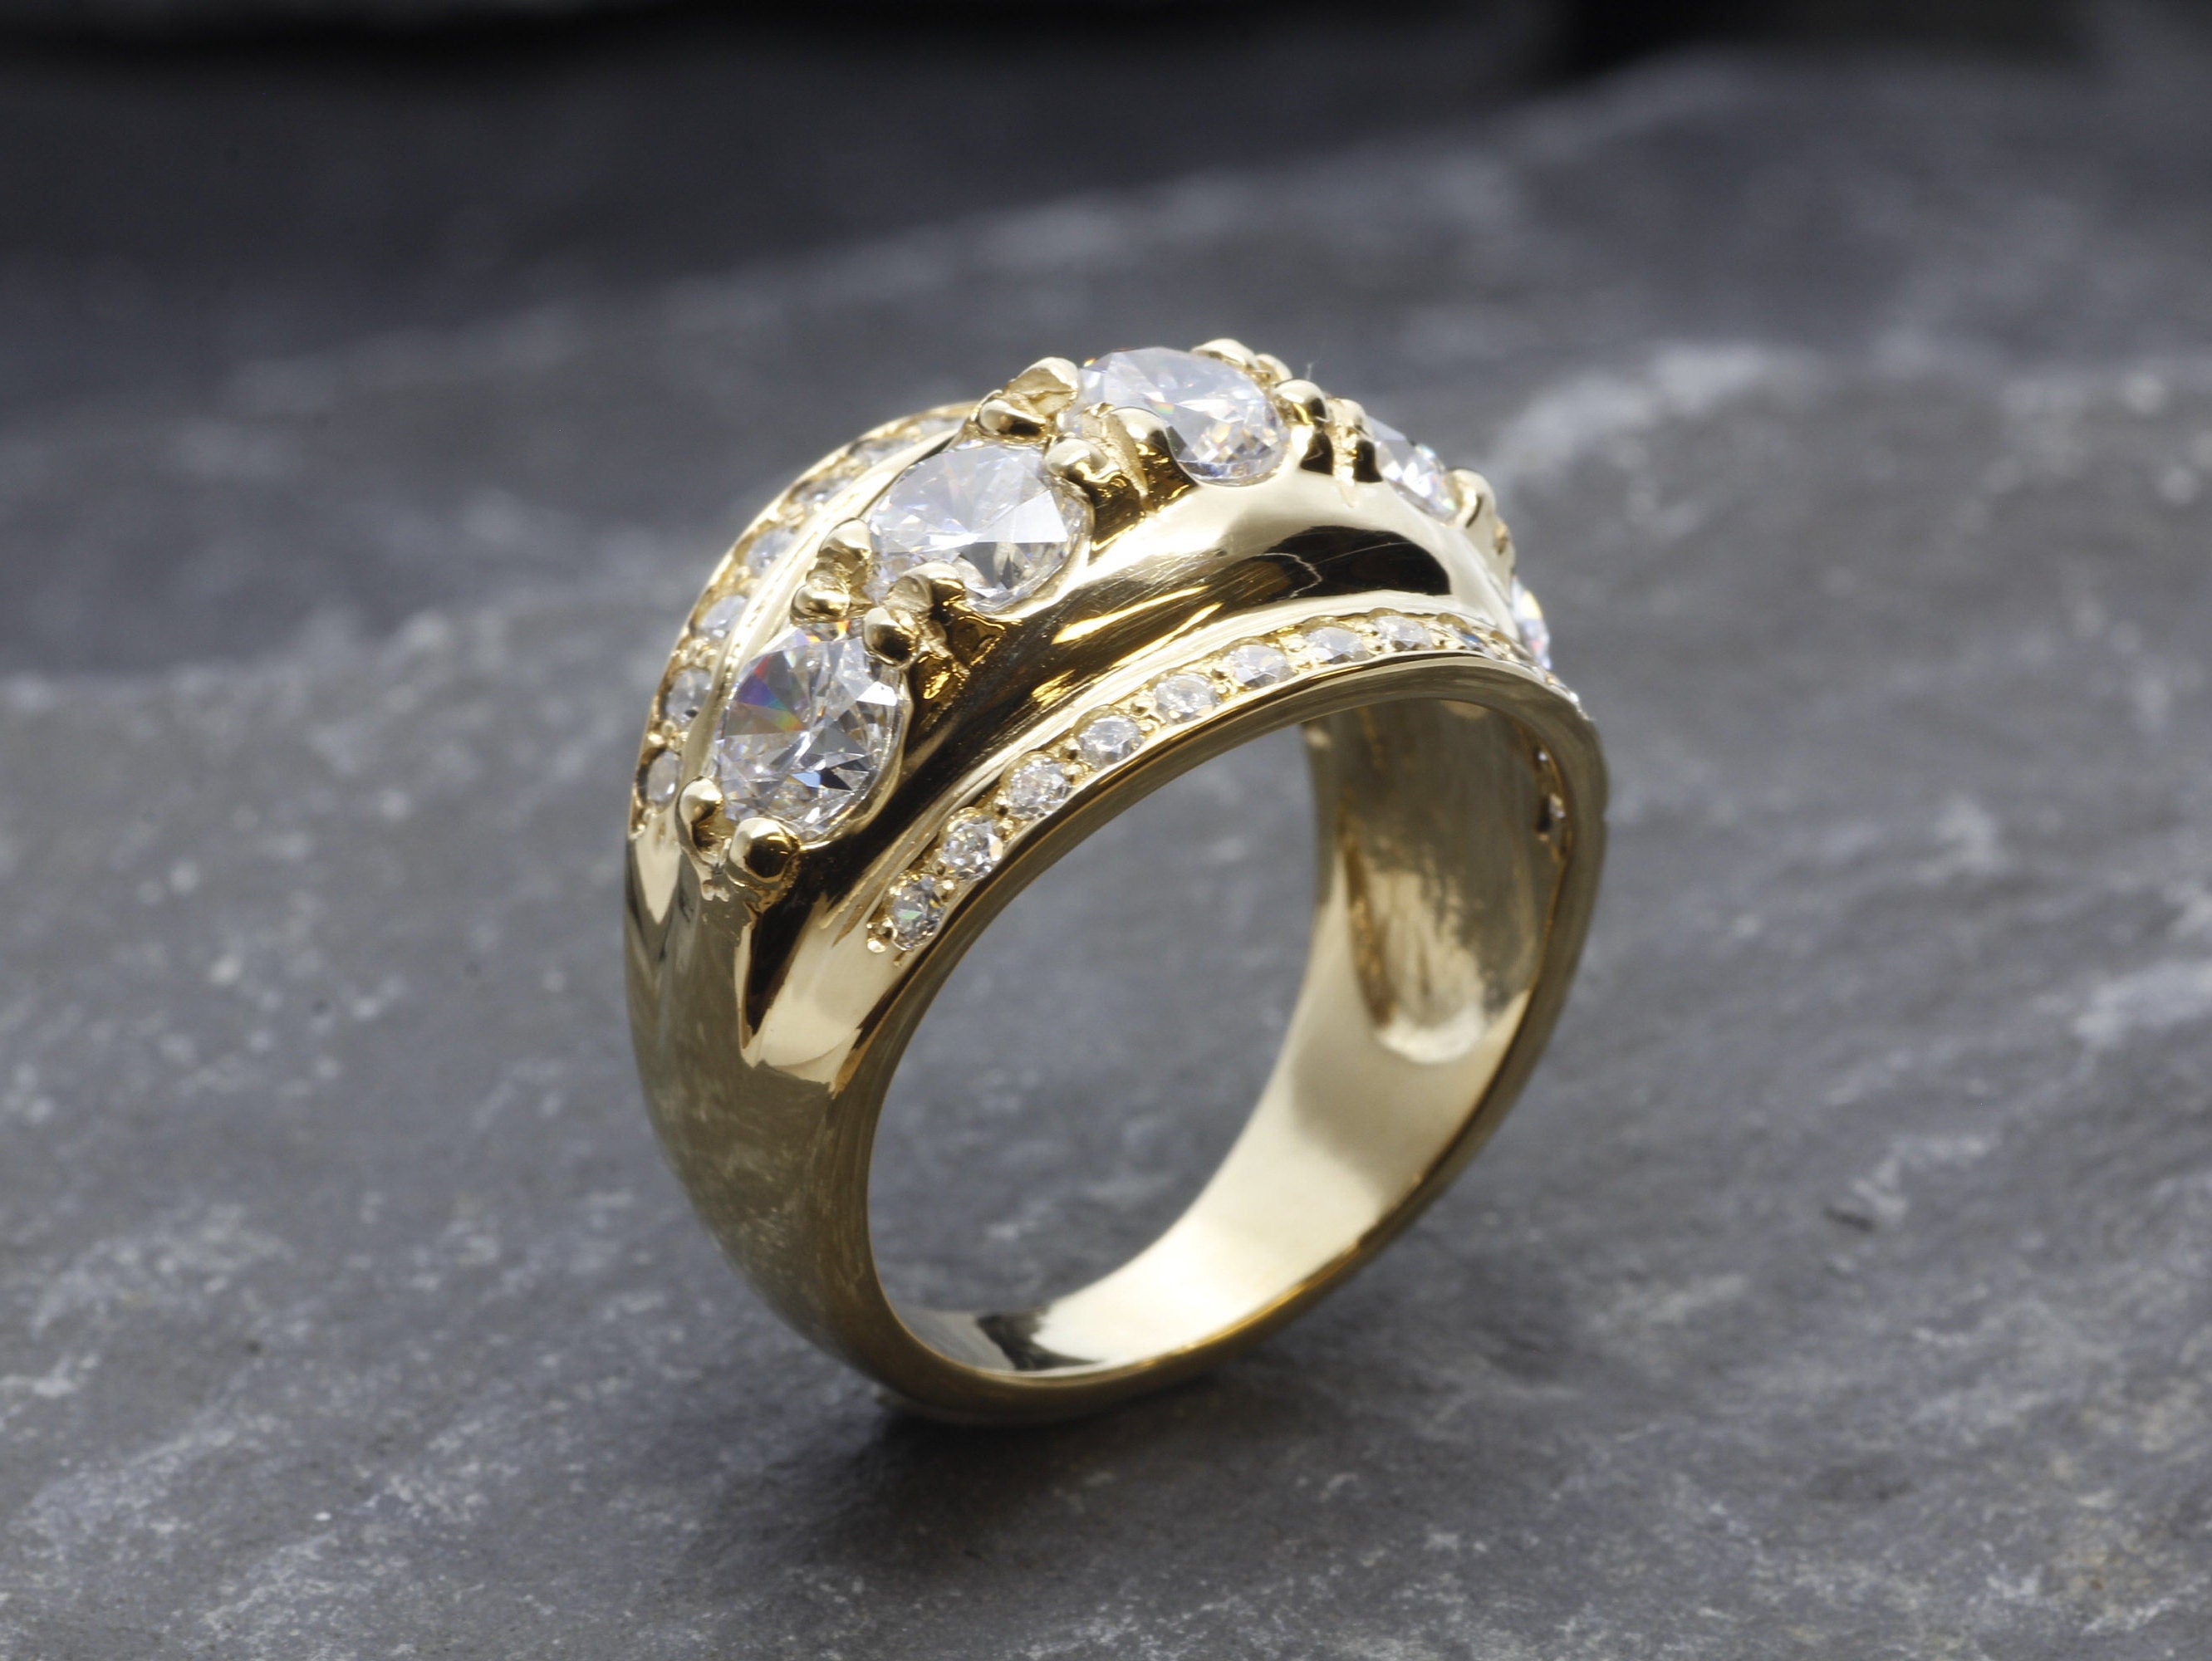 Thick Gold Band, Diamond Band, Wide Gold Ring, Created Diamond, Gold Plated Ring, Sparkly Ring, Shield Ring, Statement Band, Vermeil Ring